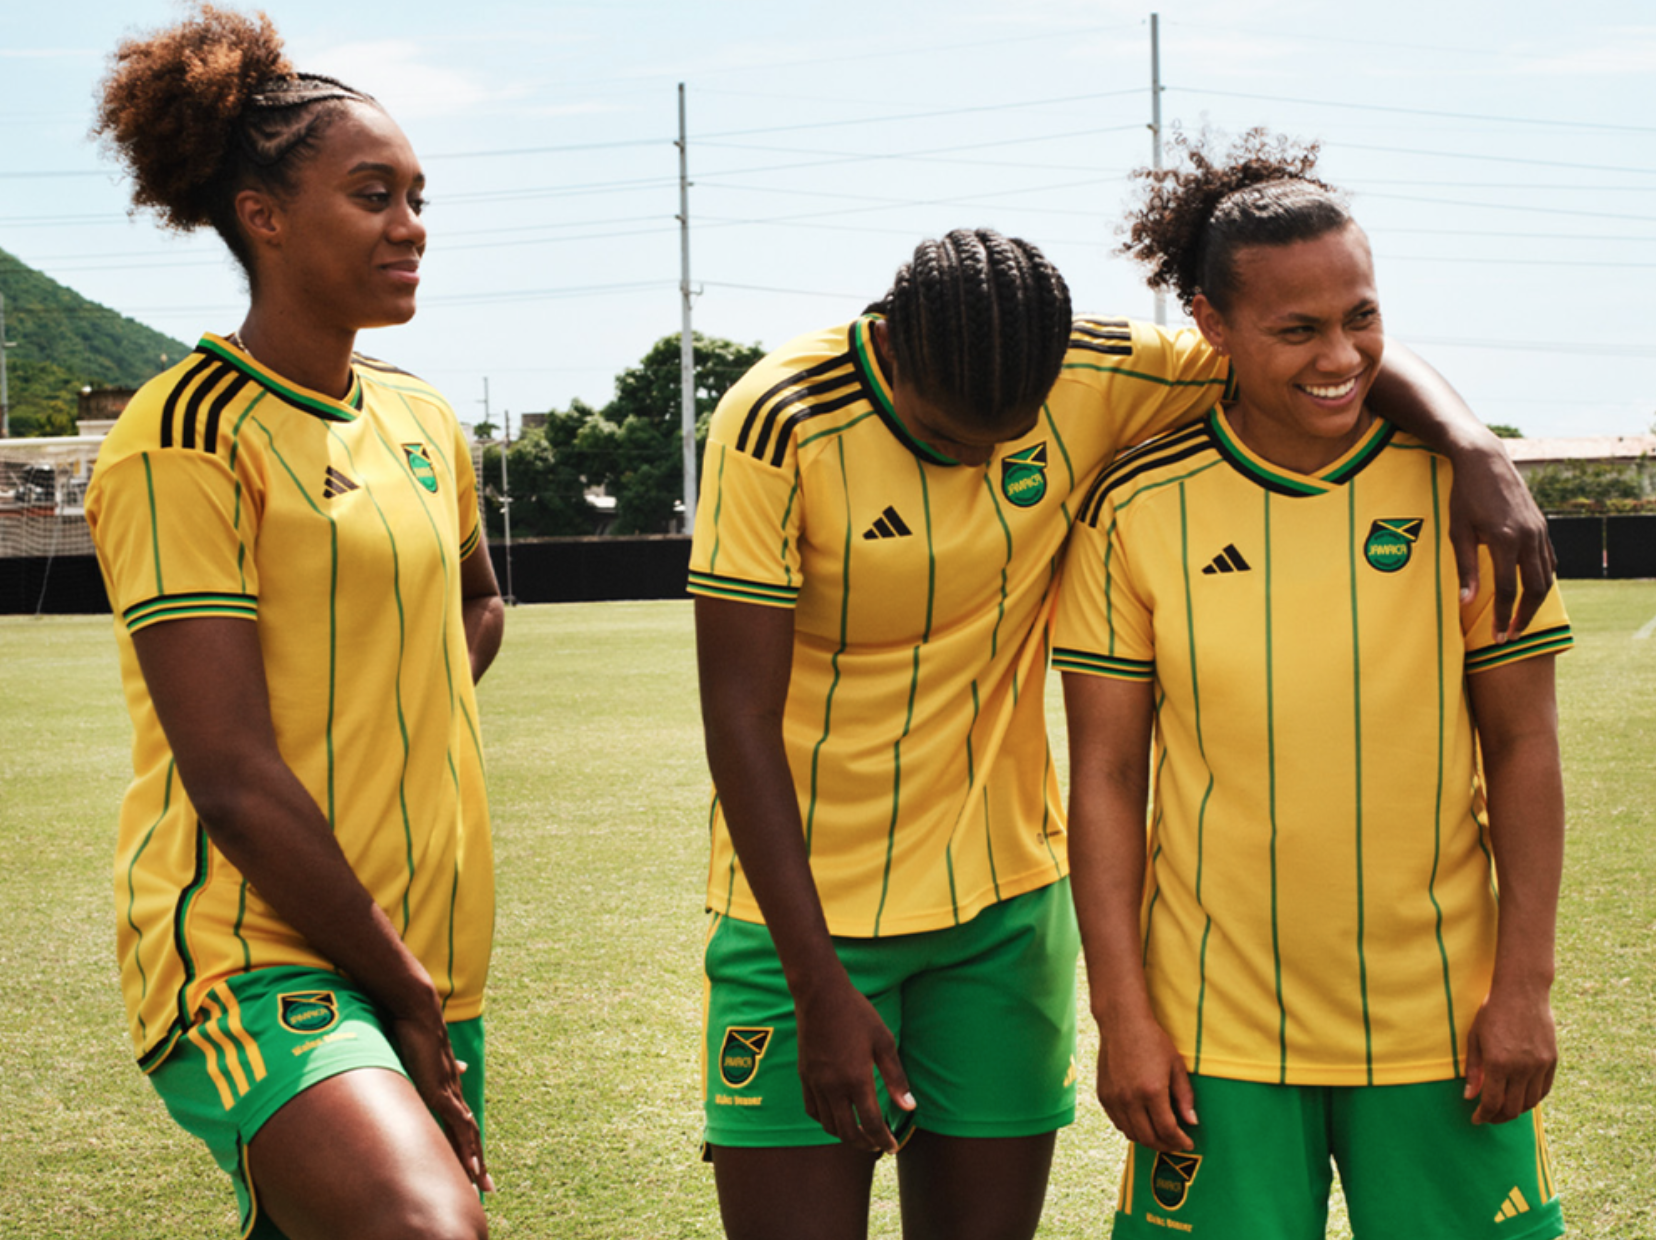 Three soccer players in yellow and green jerseys, one looking down at another&#x27;s sneakers, on a field